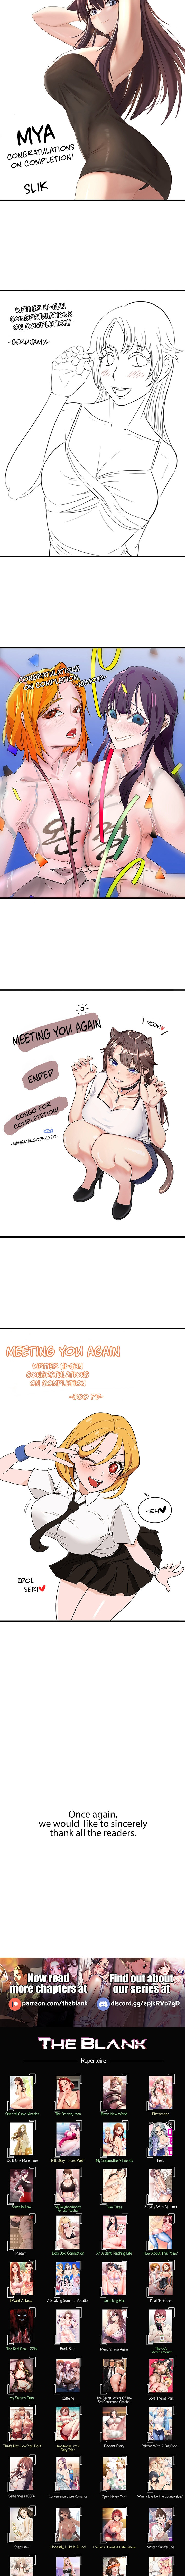 Meeting you again - Chapter 40.5 Page 3